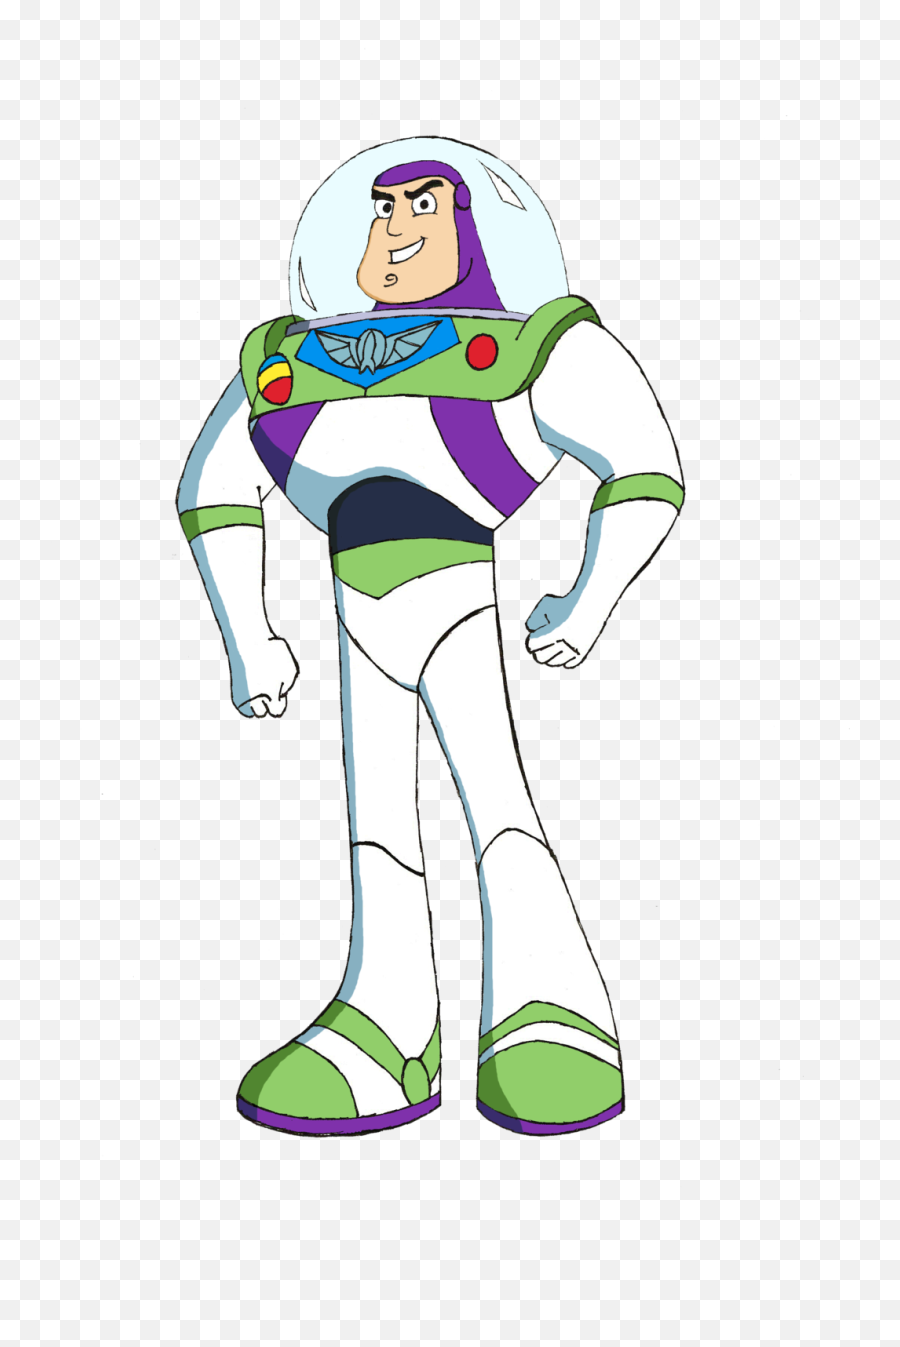 Buzz Lightyear Png Pic Png Svg Clip - Buzz Lightyear Cartoon 2d Emoji,Buzz Lightyear Emoji